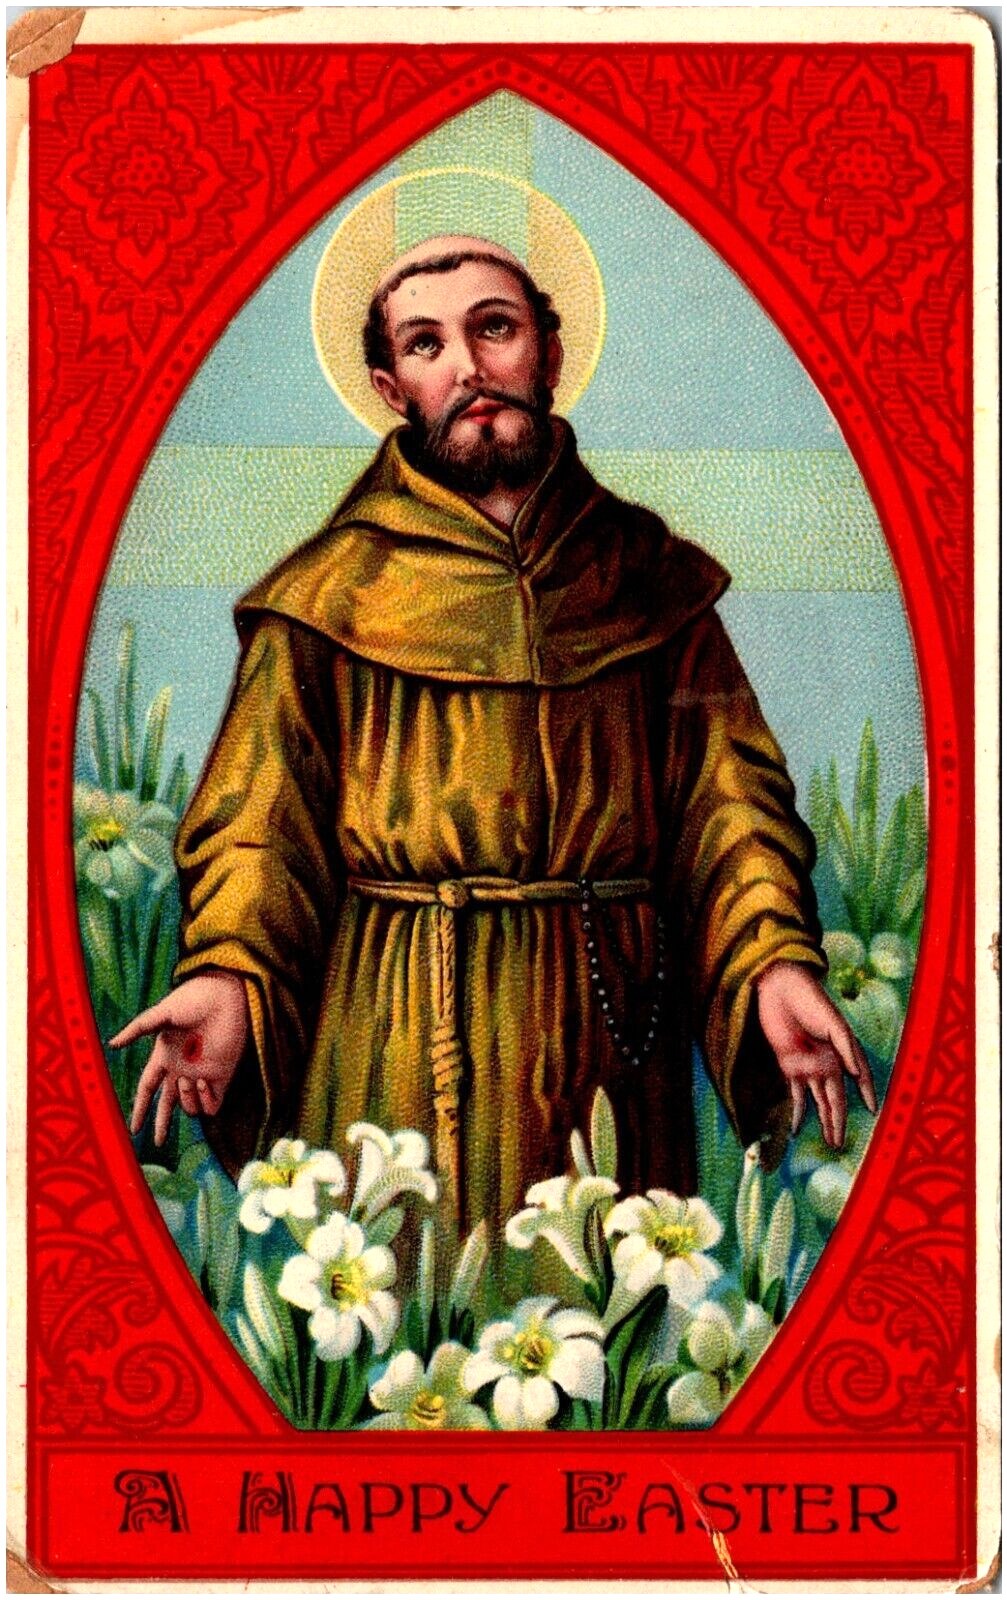 A Happy Easter St. Francis of Assisi Praying Over Lilies 1913 Religious Postcard